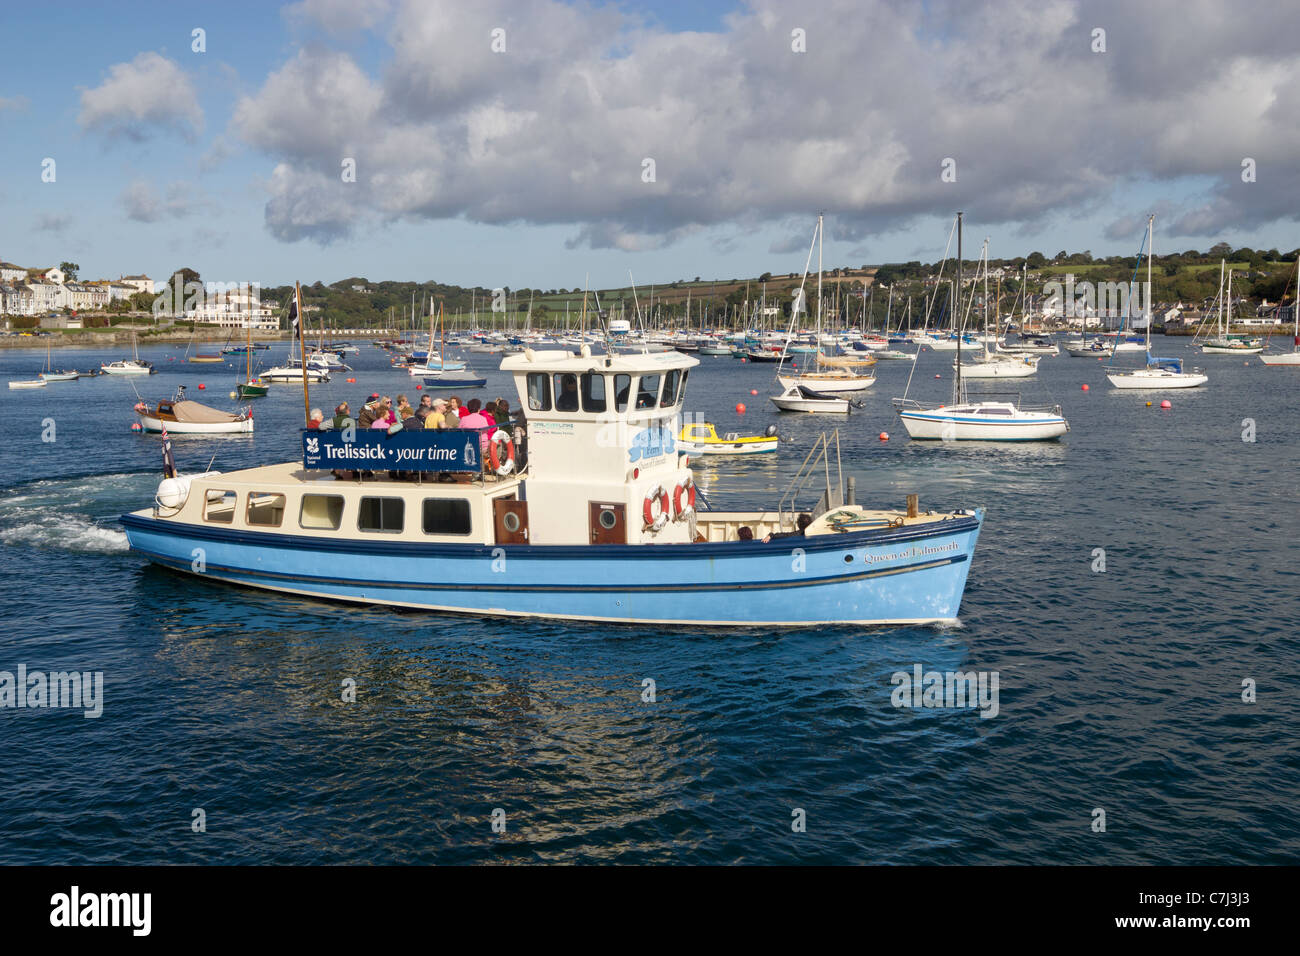 Queen of Falmouth, St. Mawes ferry leaving the Prince Of Wales Pier, Falmouth Cornwall UK. Stock Photo